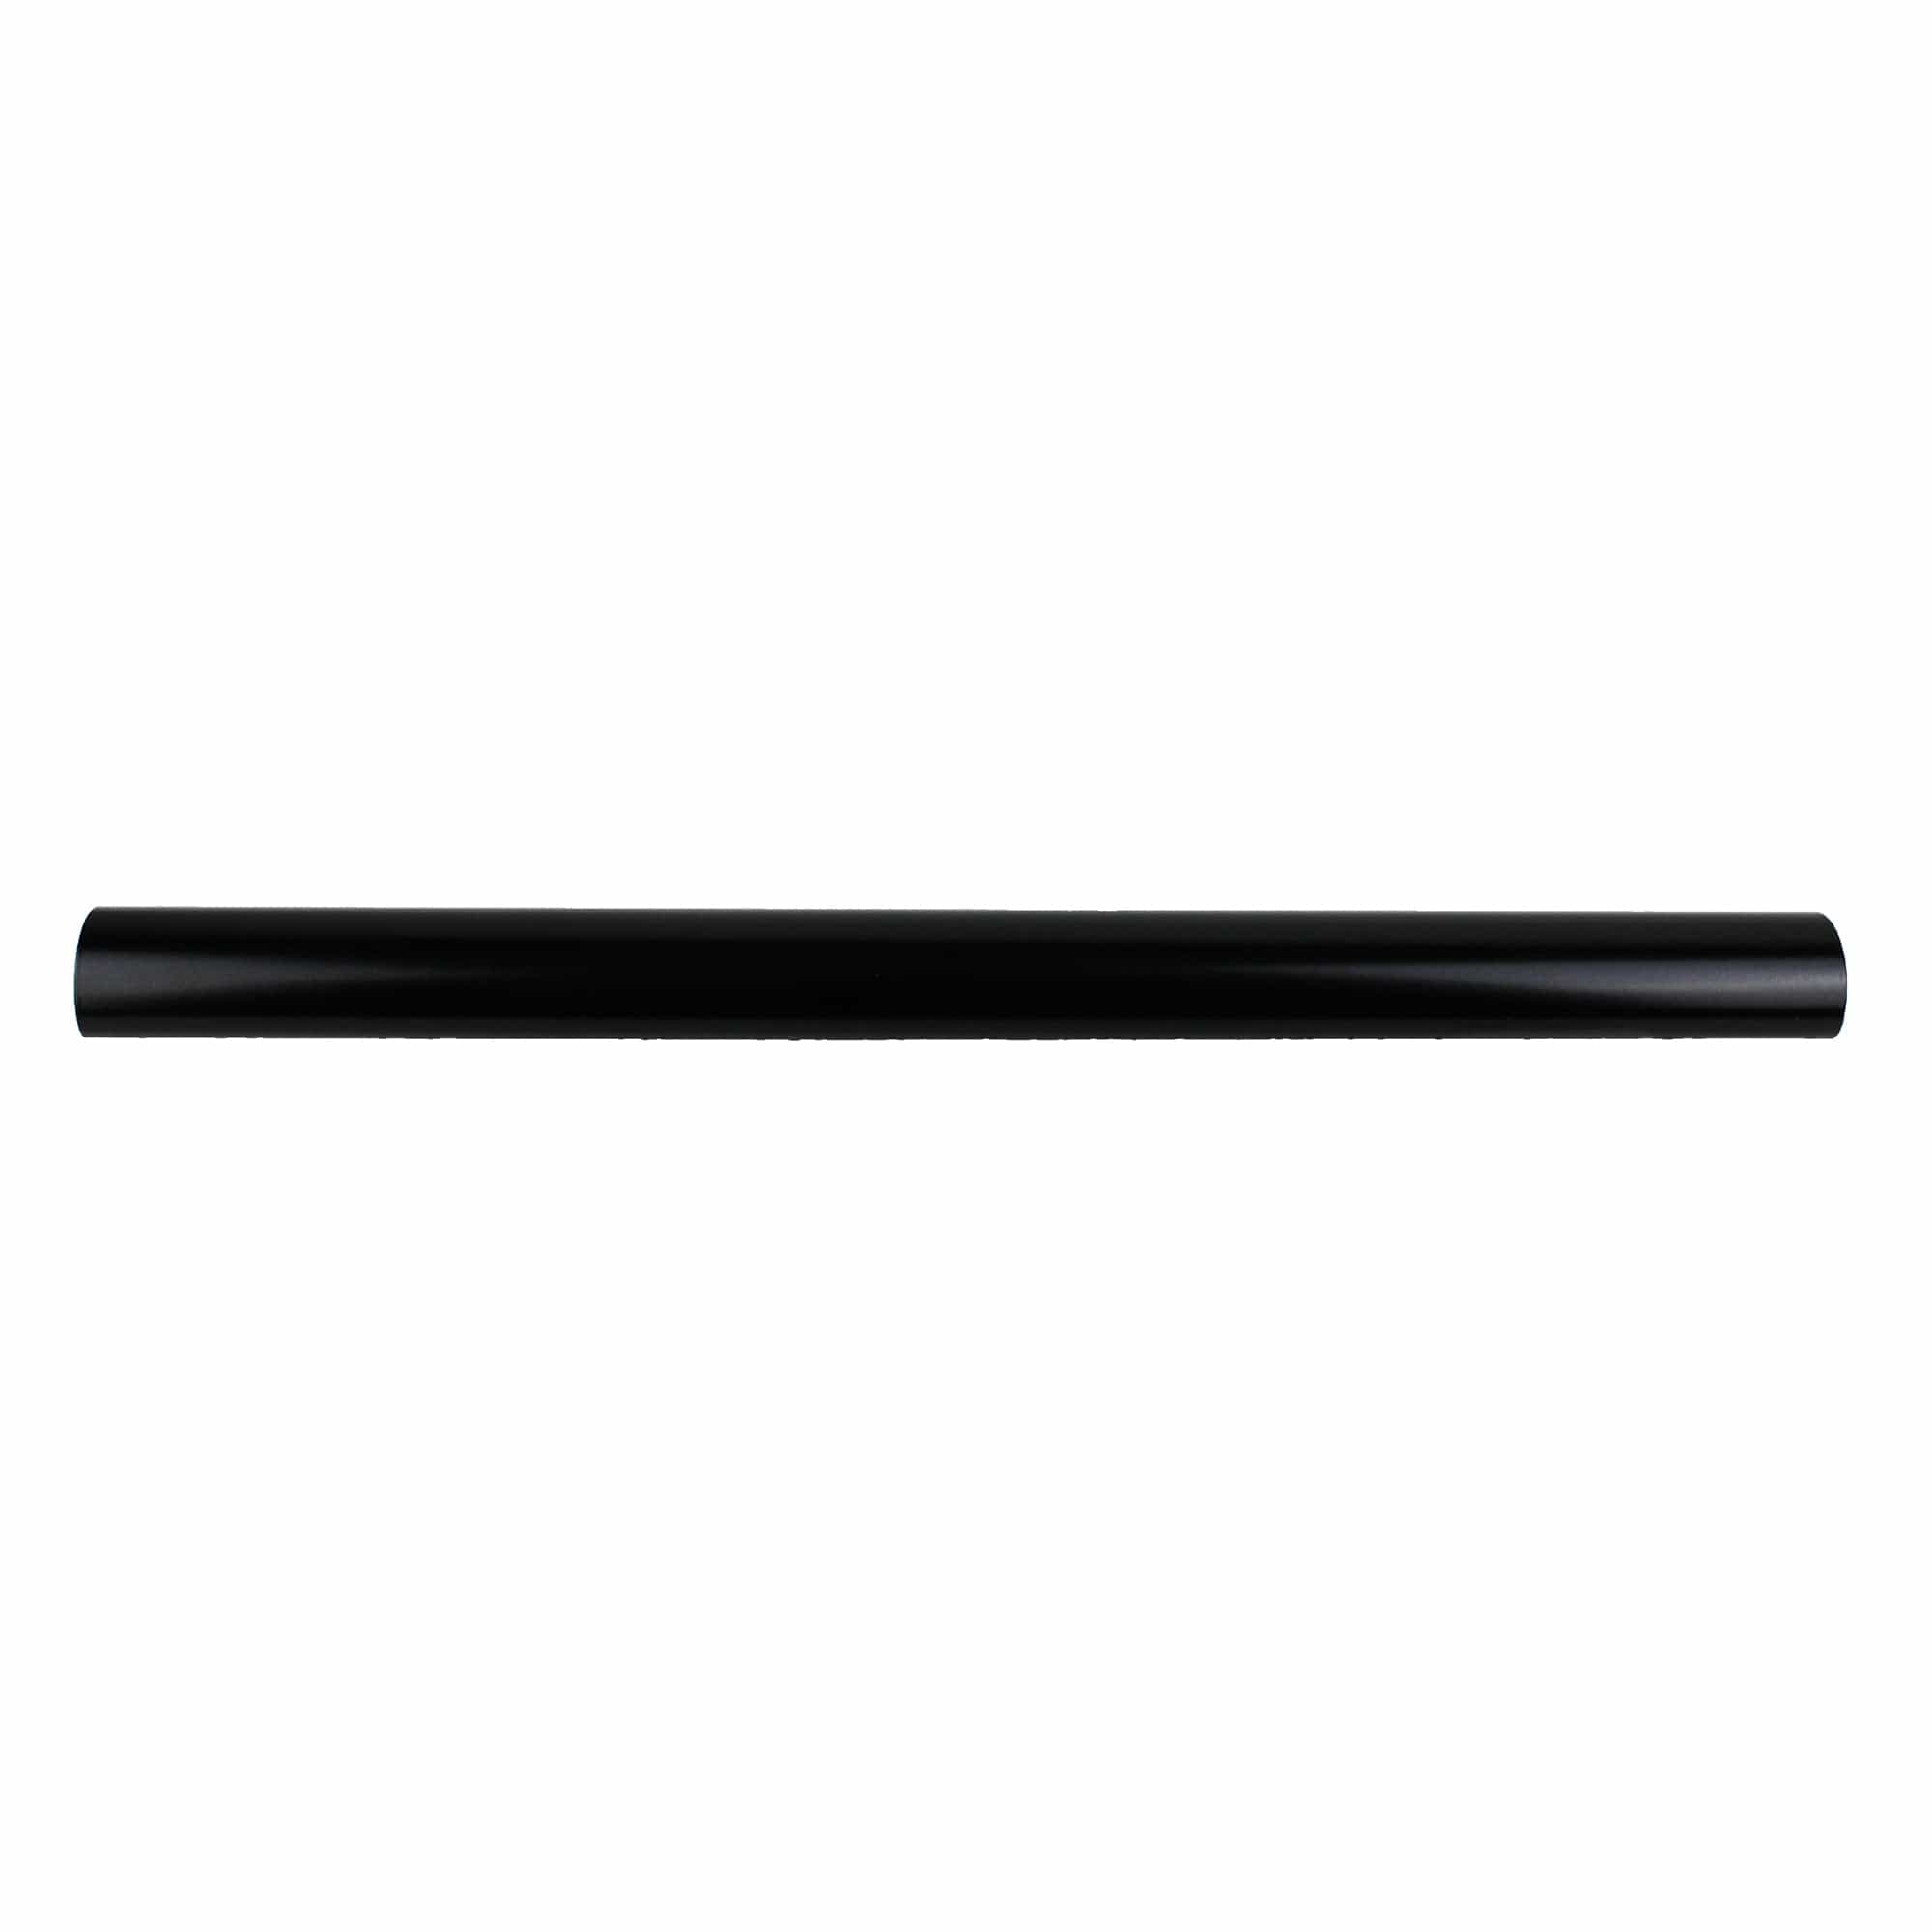 Dometic 3315009.018U 18" Awning Extension Kit Deluxe/Elite - Black